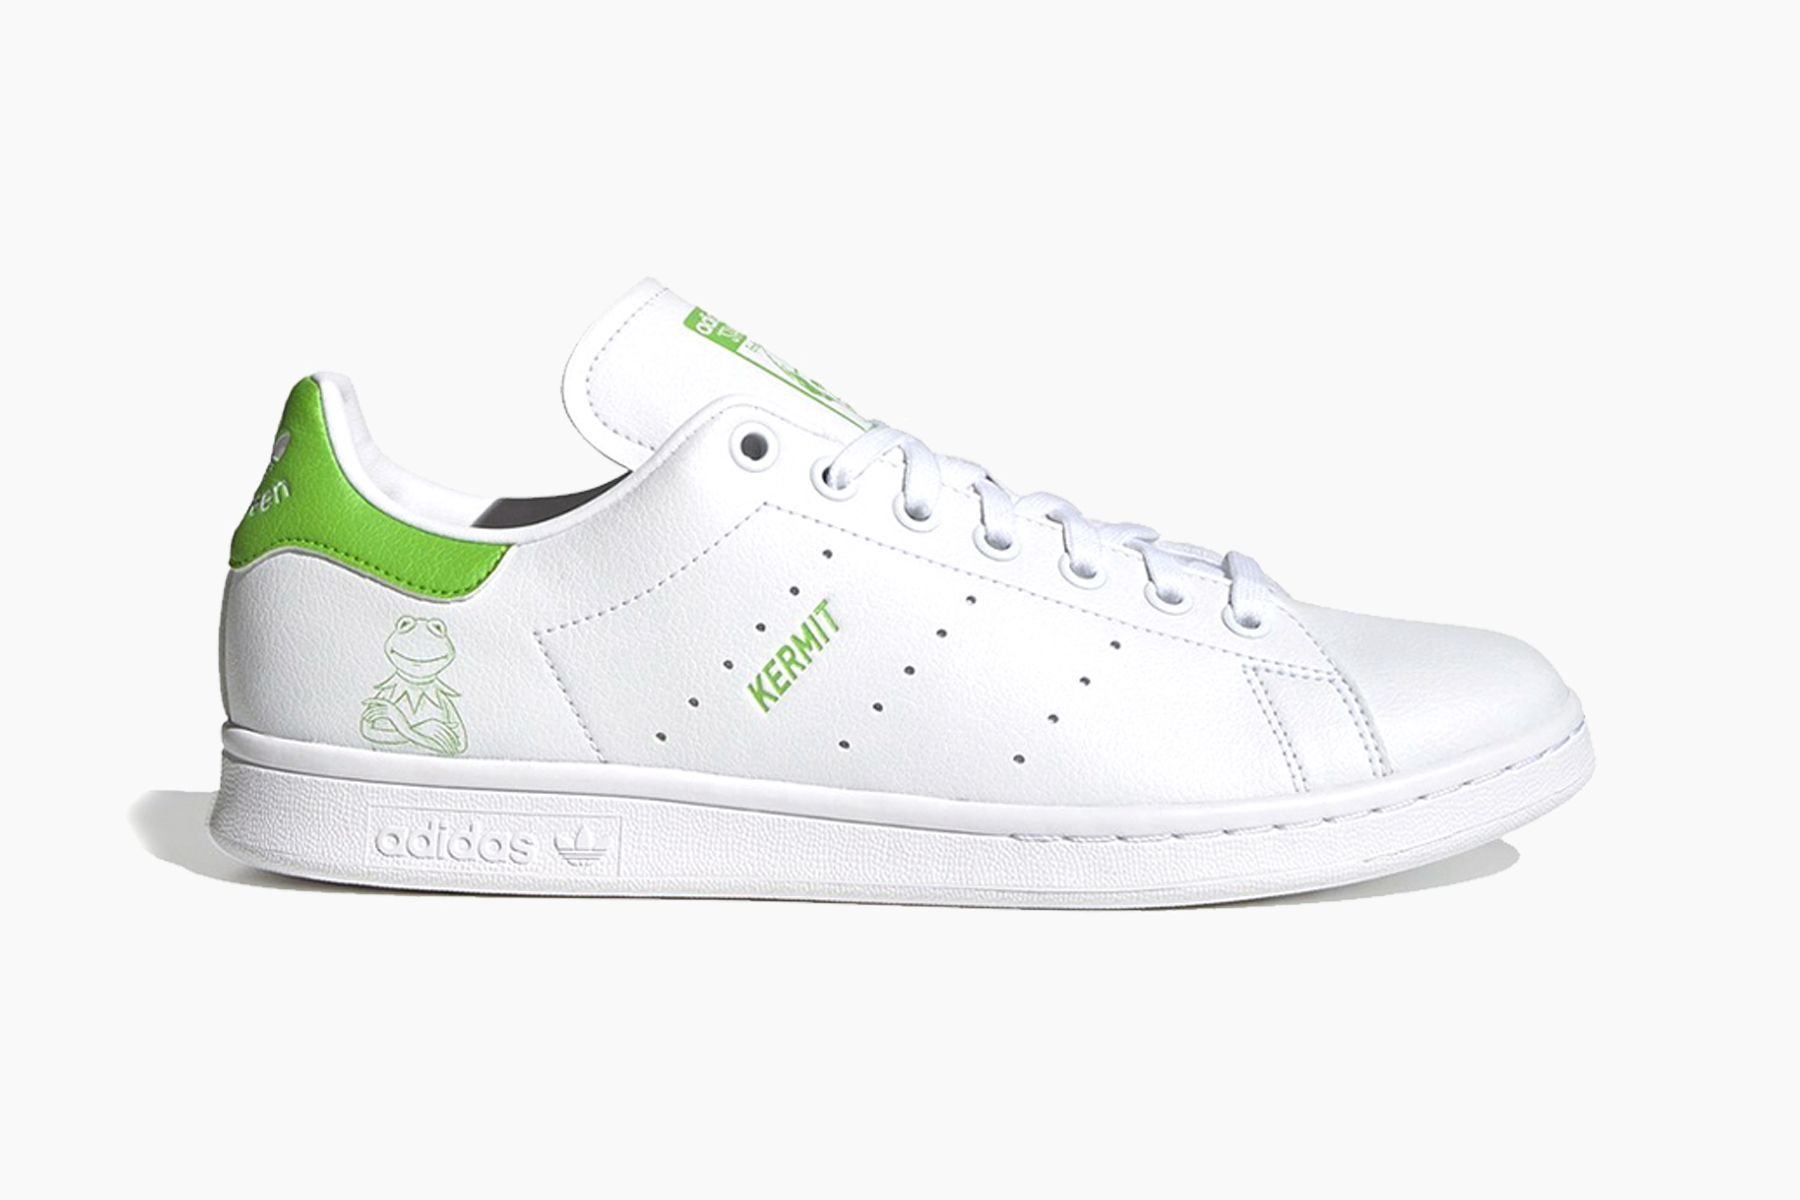 Adidas Originals Stan Smith Disney Muppets Kermit the Frog Shoes